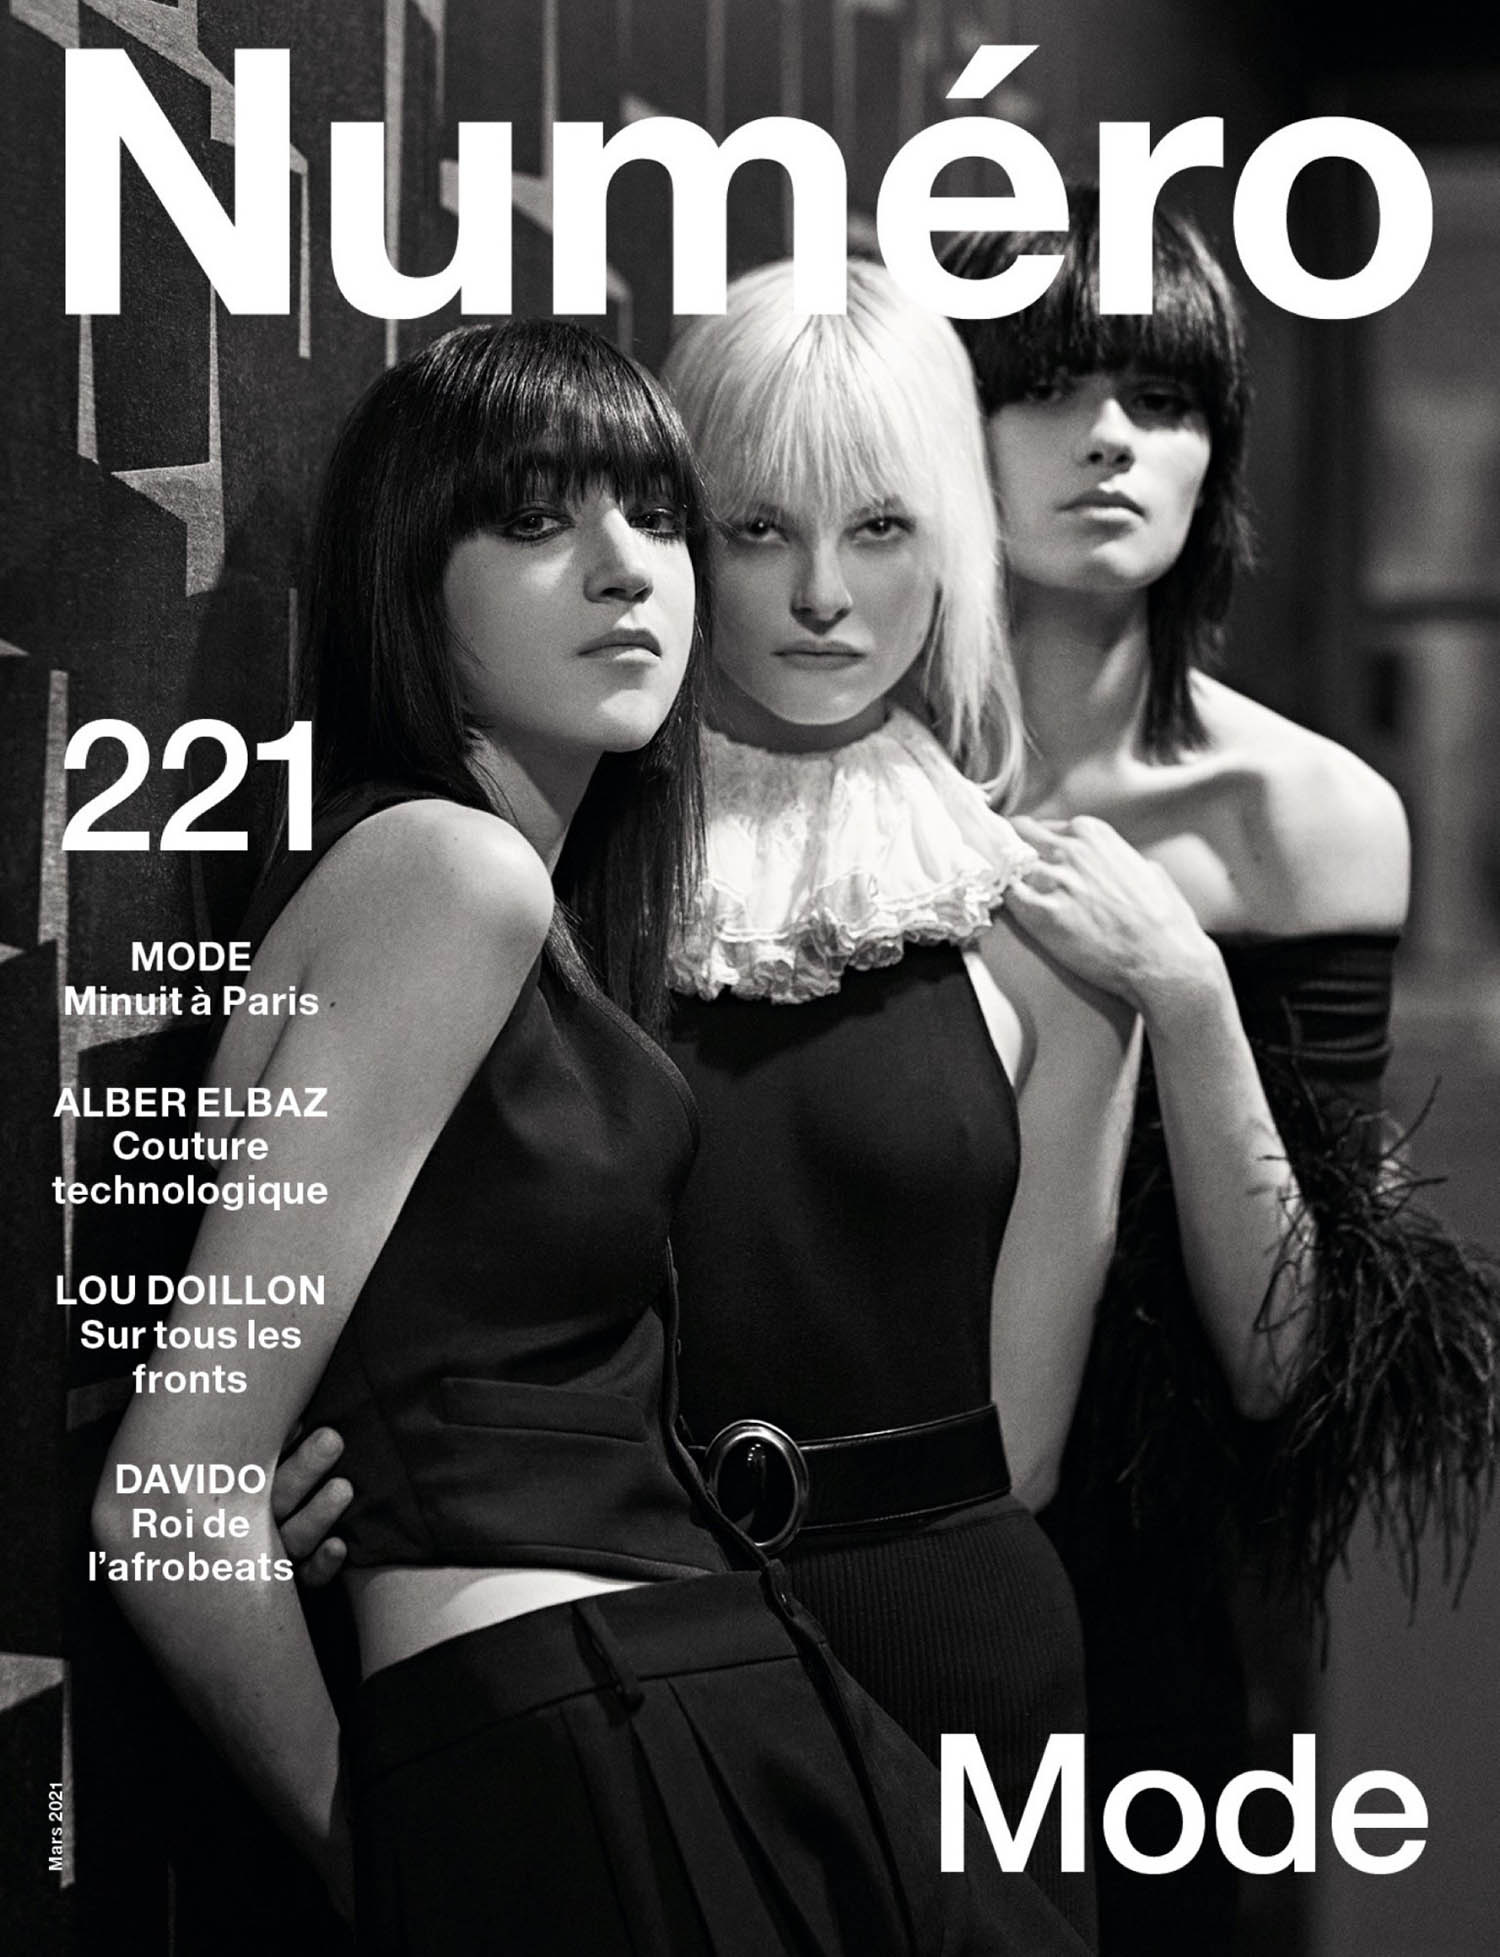 Numéro 221 March 2021 Cover Story Editorial